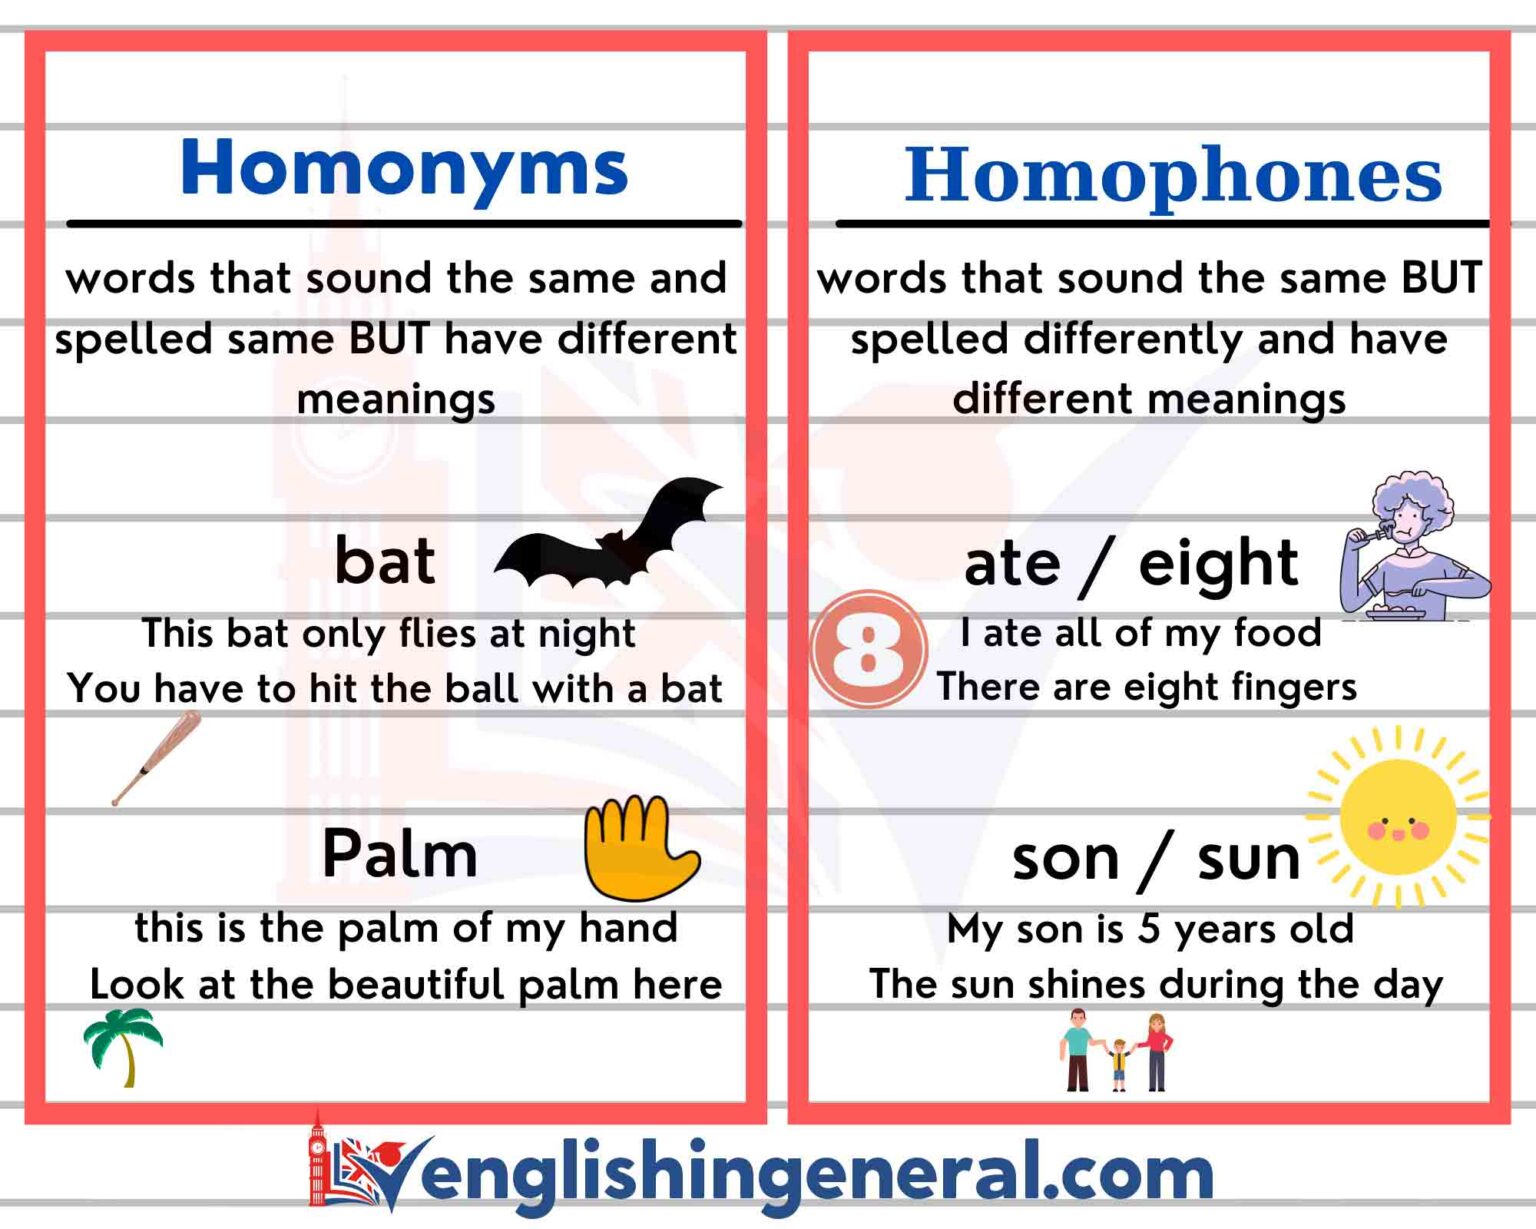 What Is The Difference Between Homophones And Homonyms